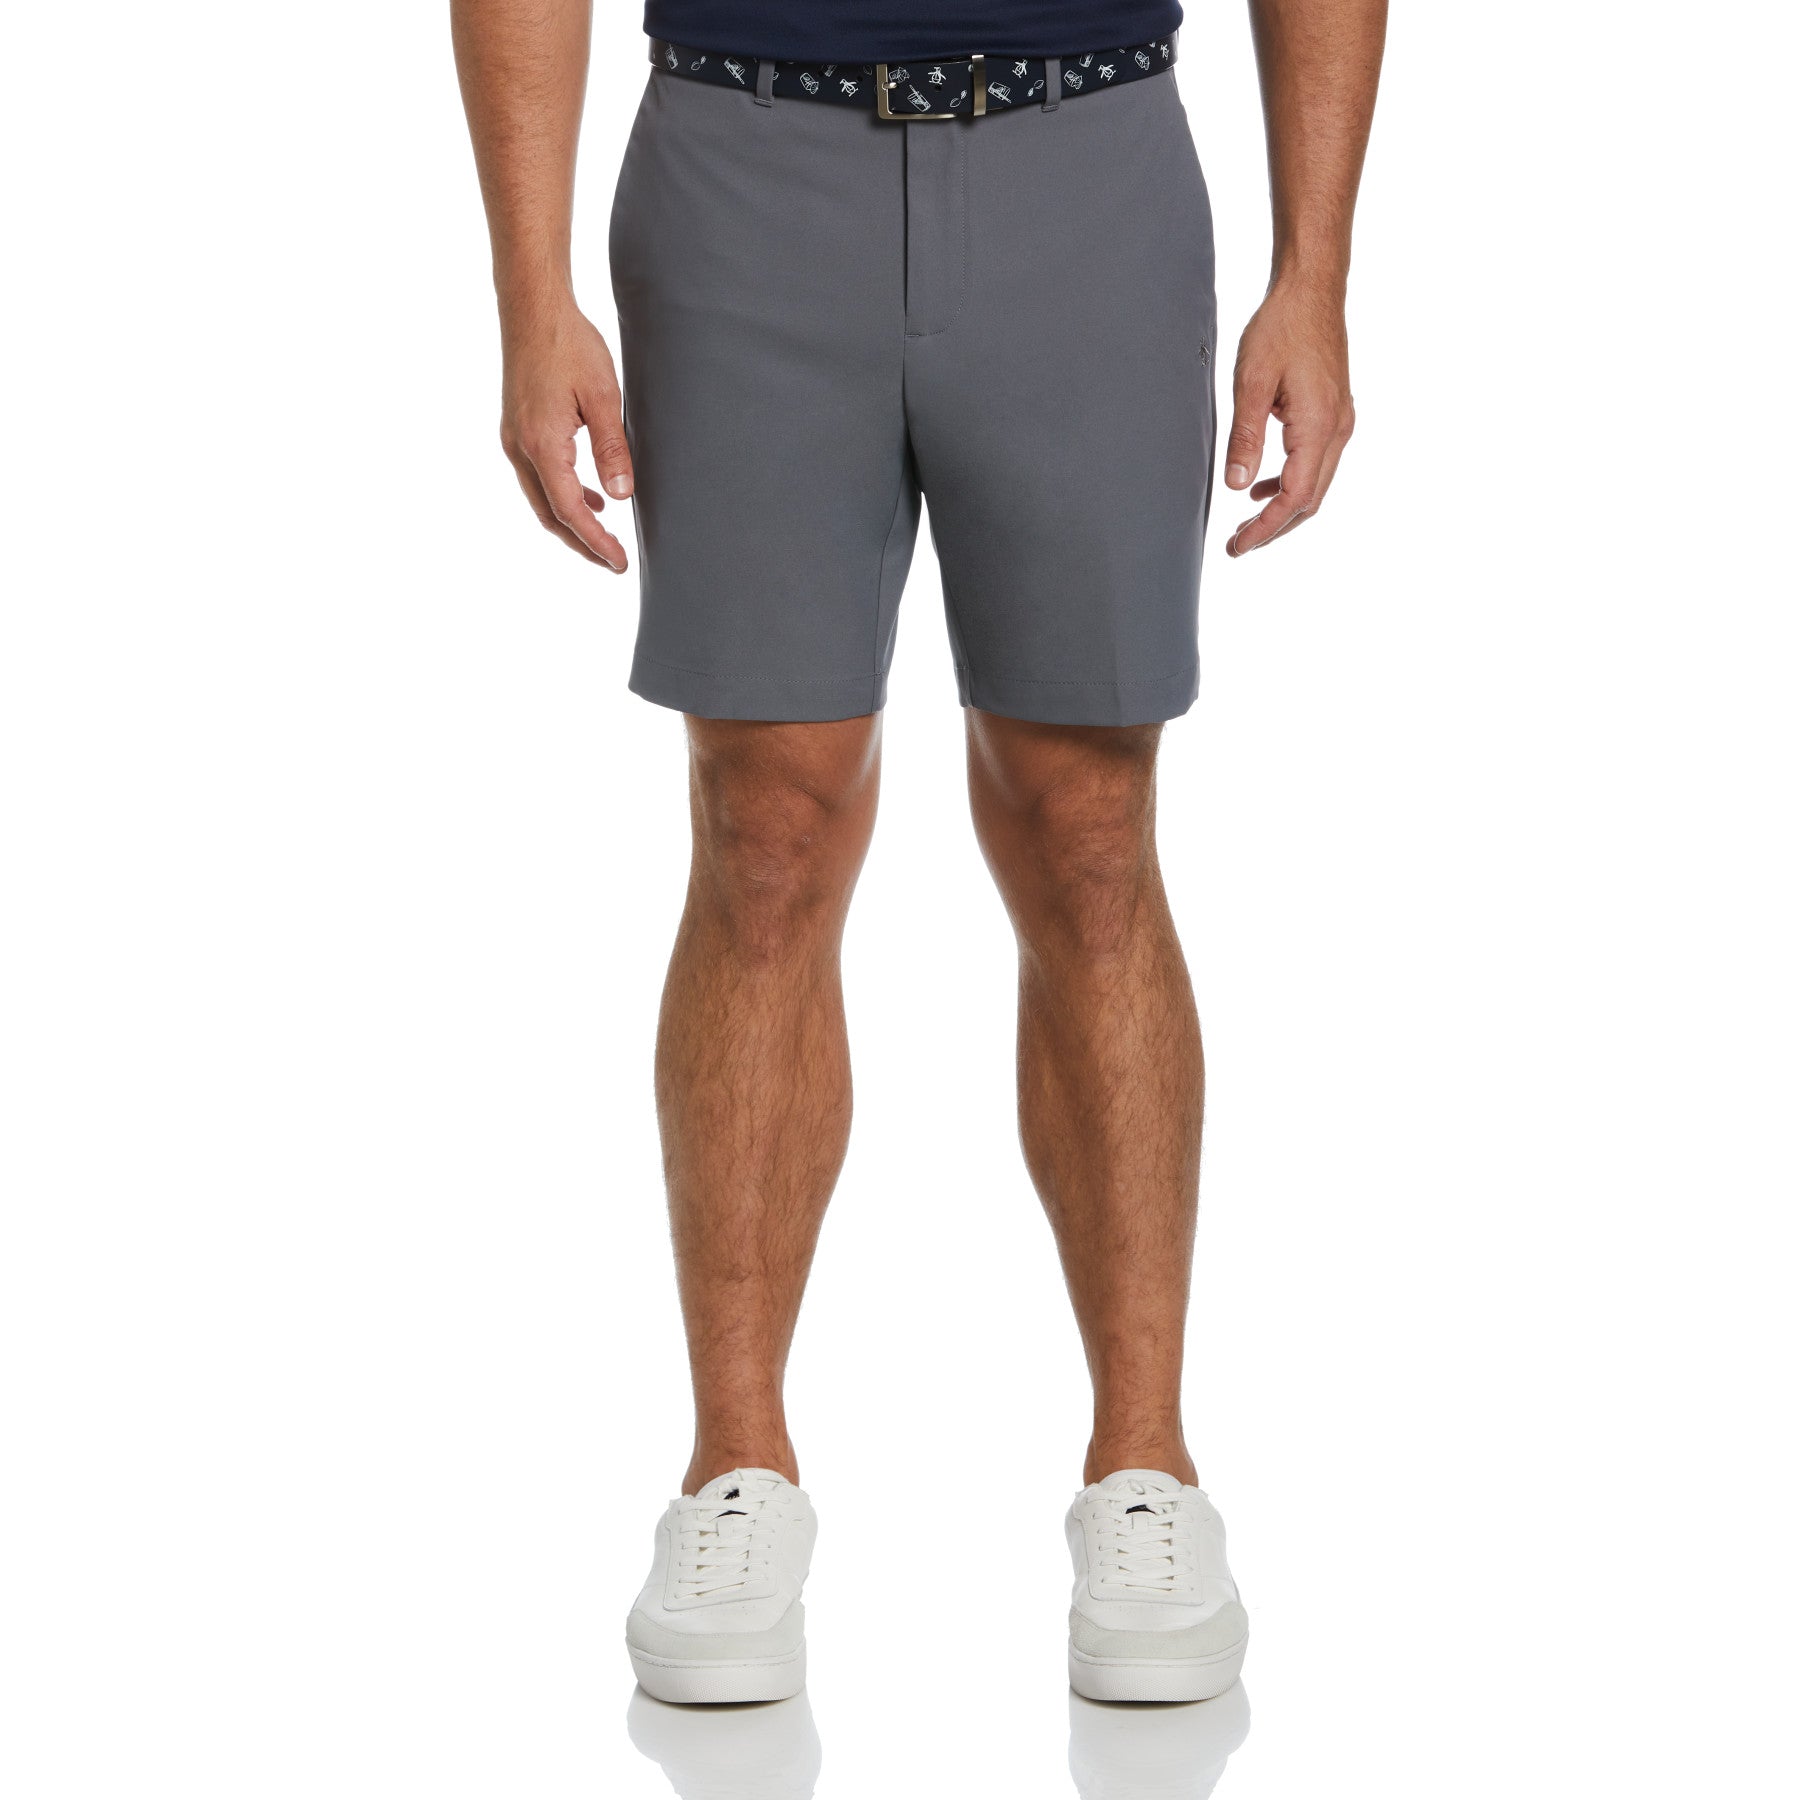 View Flat Front Solid Golf Shorts In Quiet Shade information